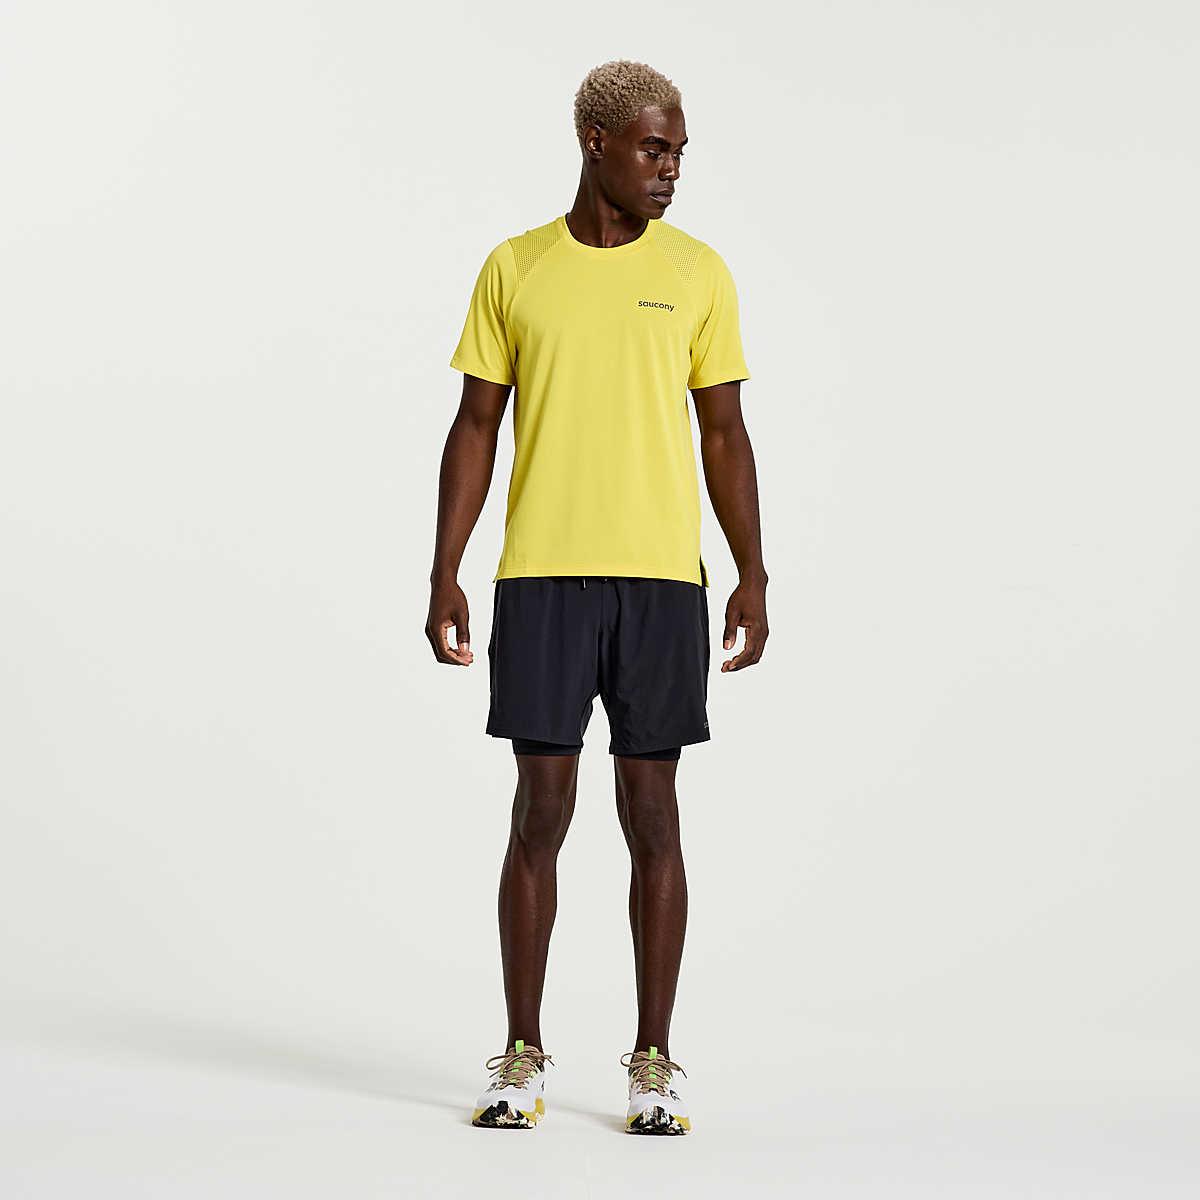 Saucony - Men's Elevate Short Sleeve - The Shoe Collective